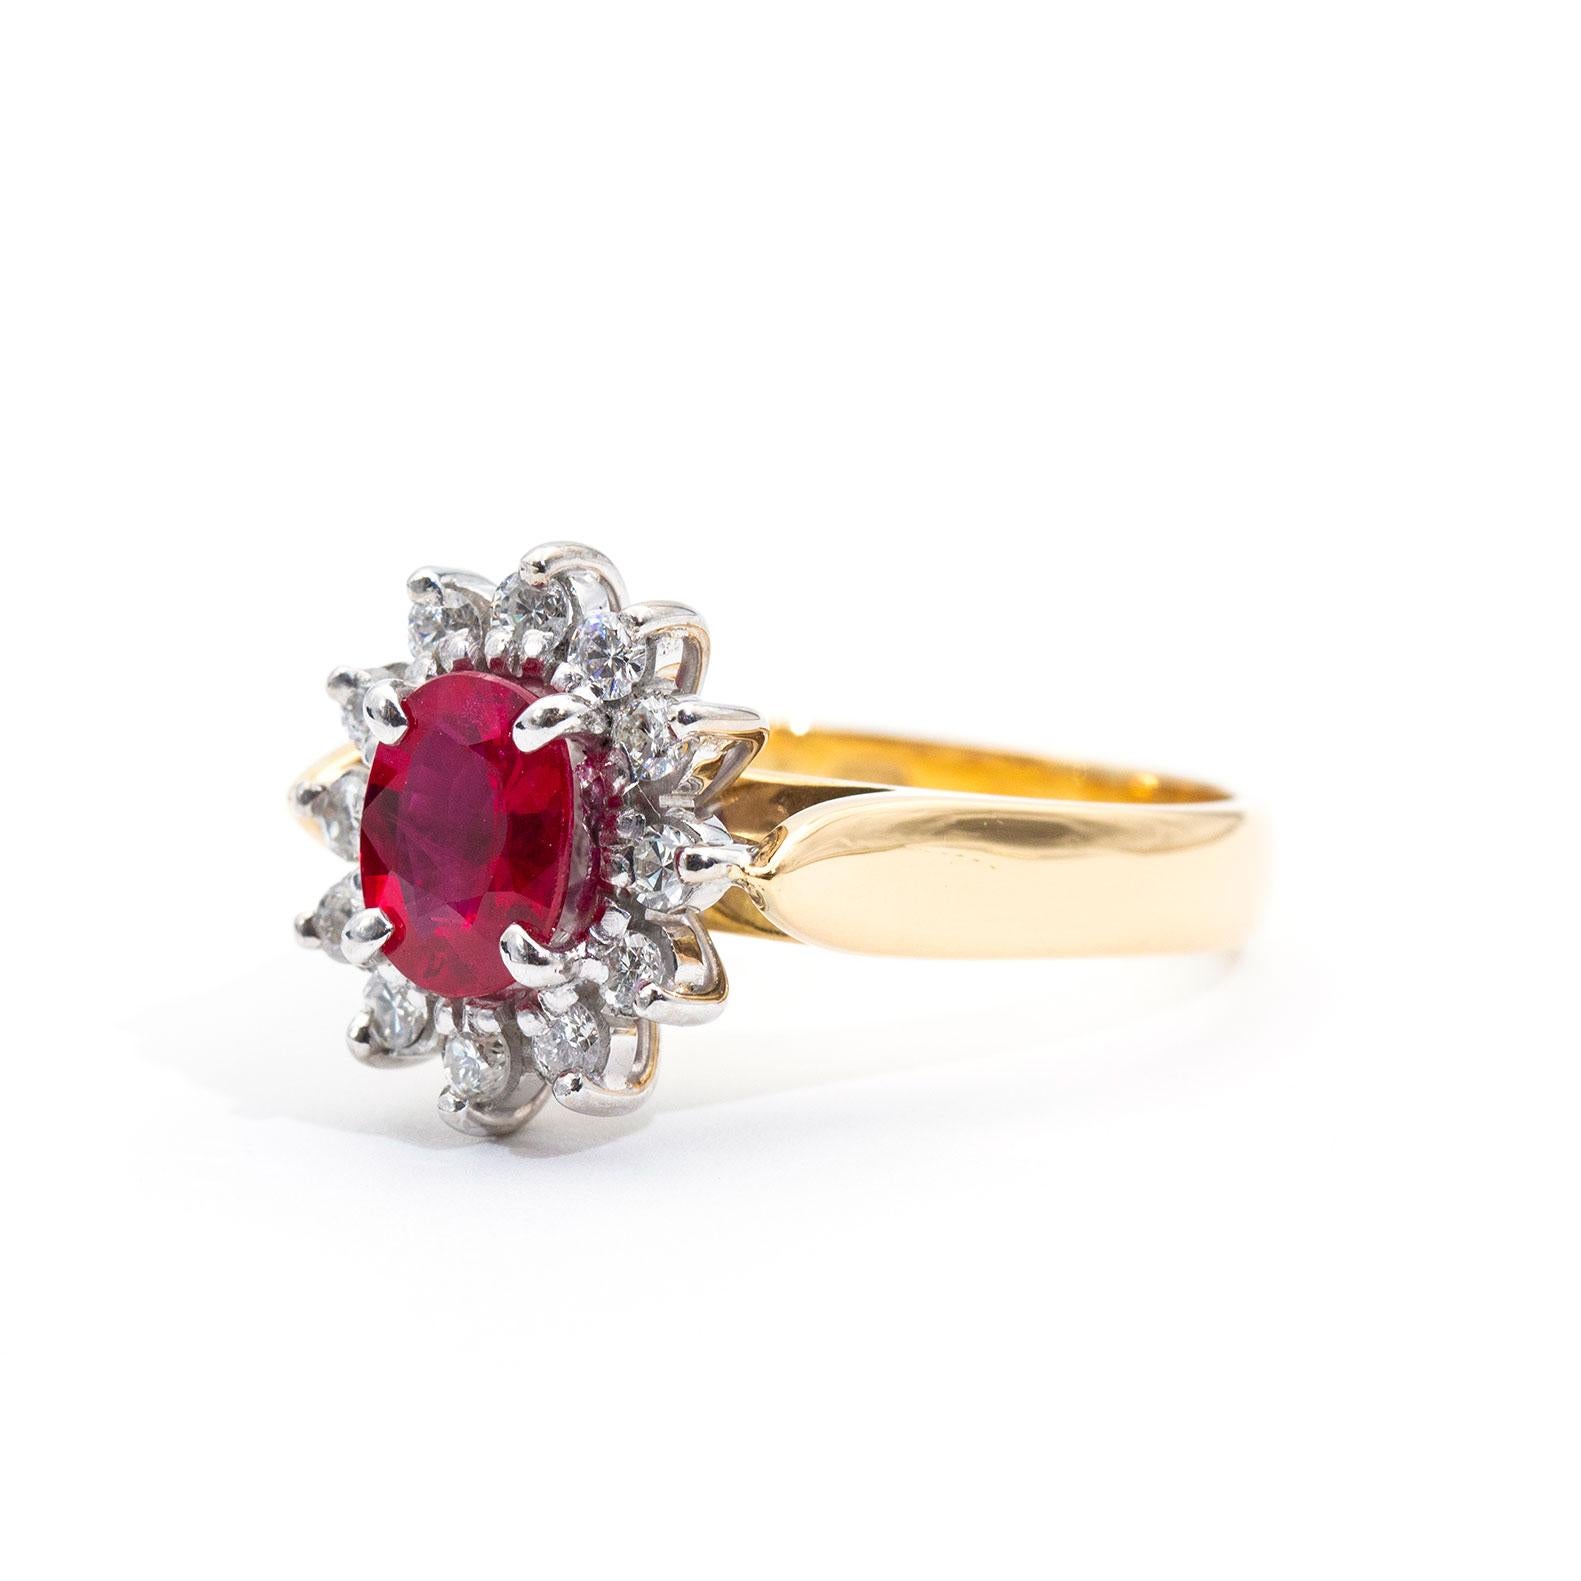 Modern 1.14 Carat Bright Red Ruby and Diamond 18 Carat Gold Vintage Cluster Ring